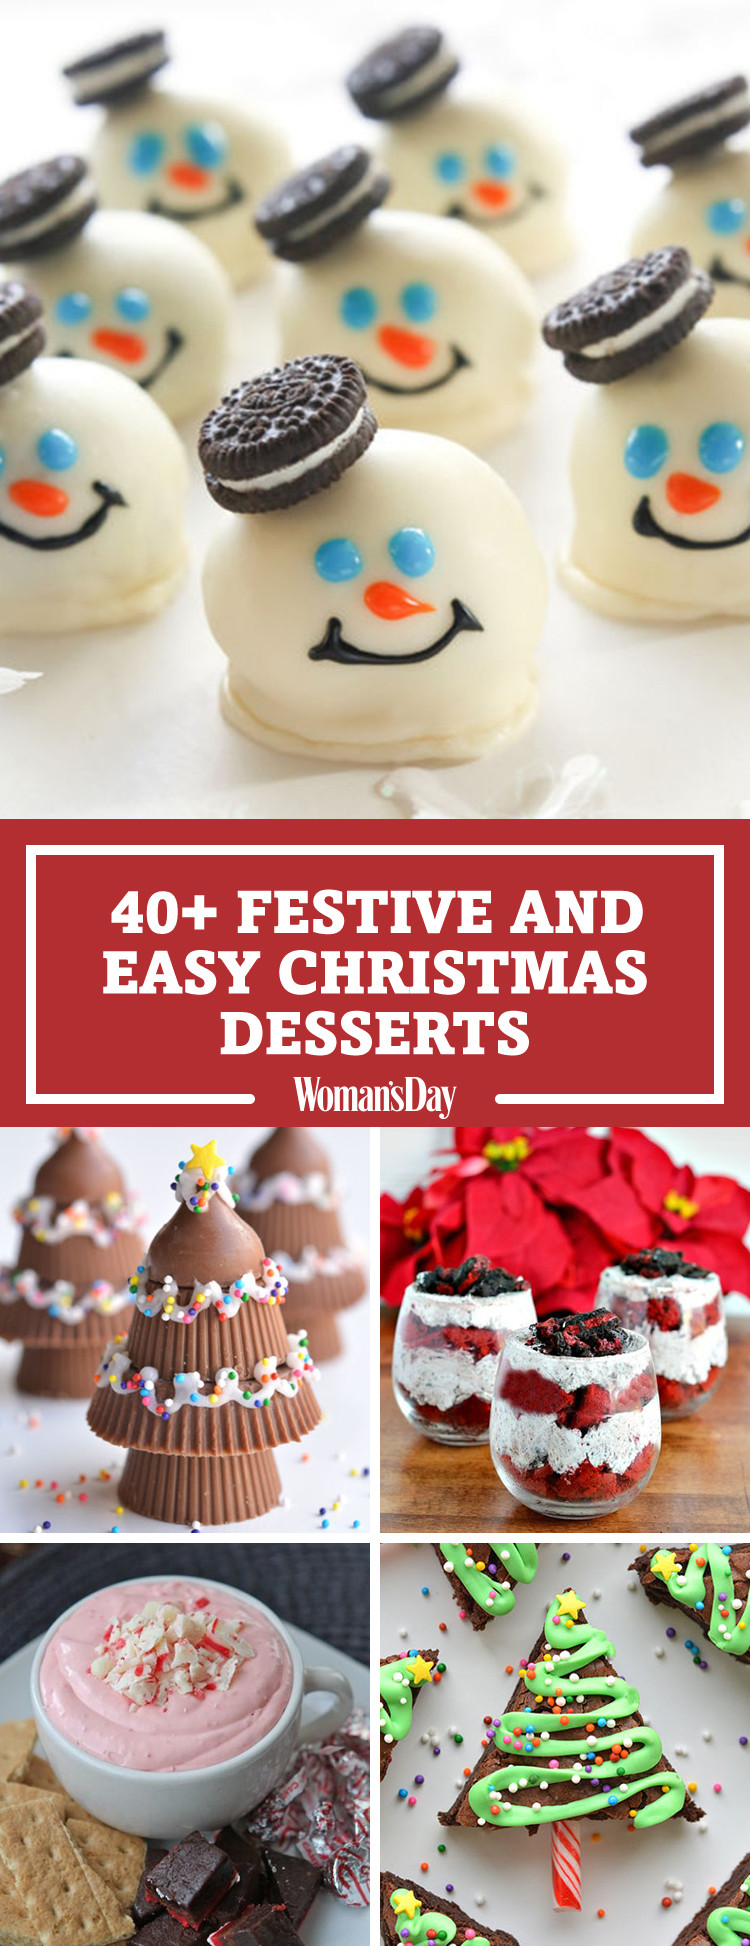 Holiday Desserts Easy
 57 Easy Christmas Dessert Recipes Best Ideas for Fun